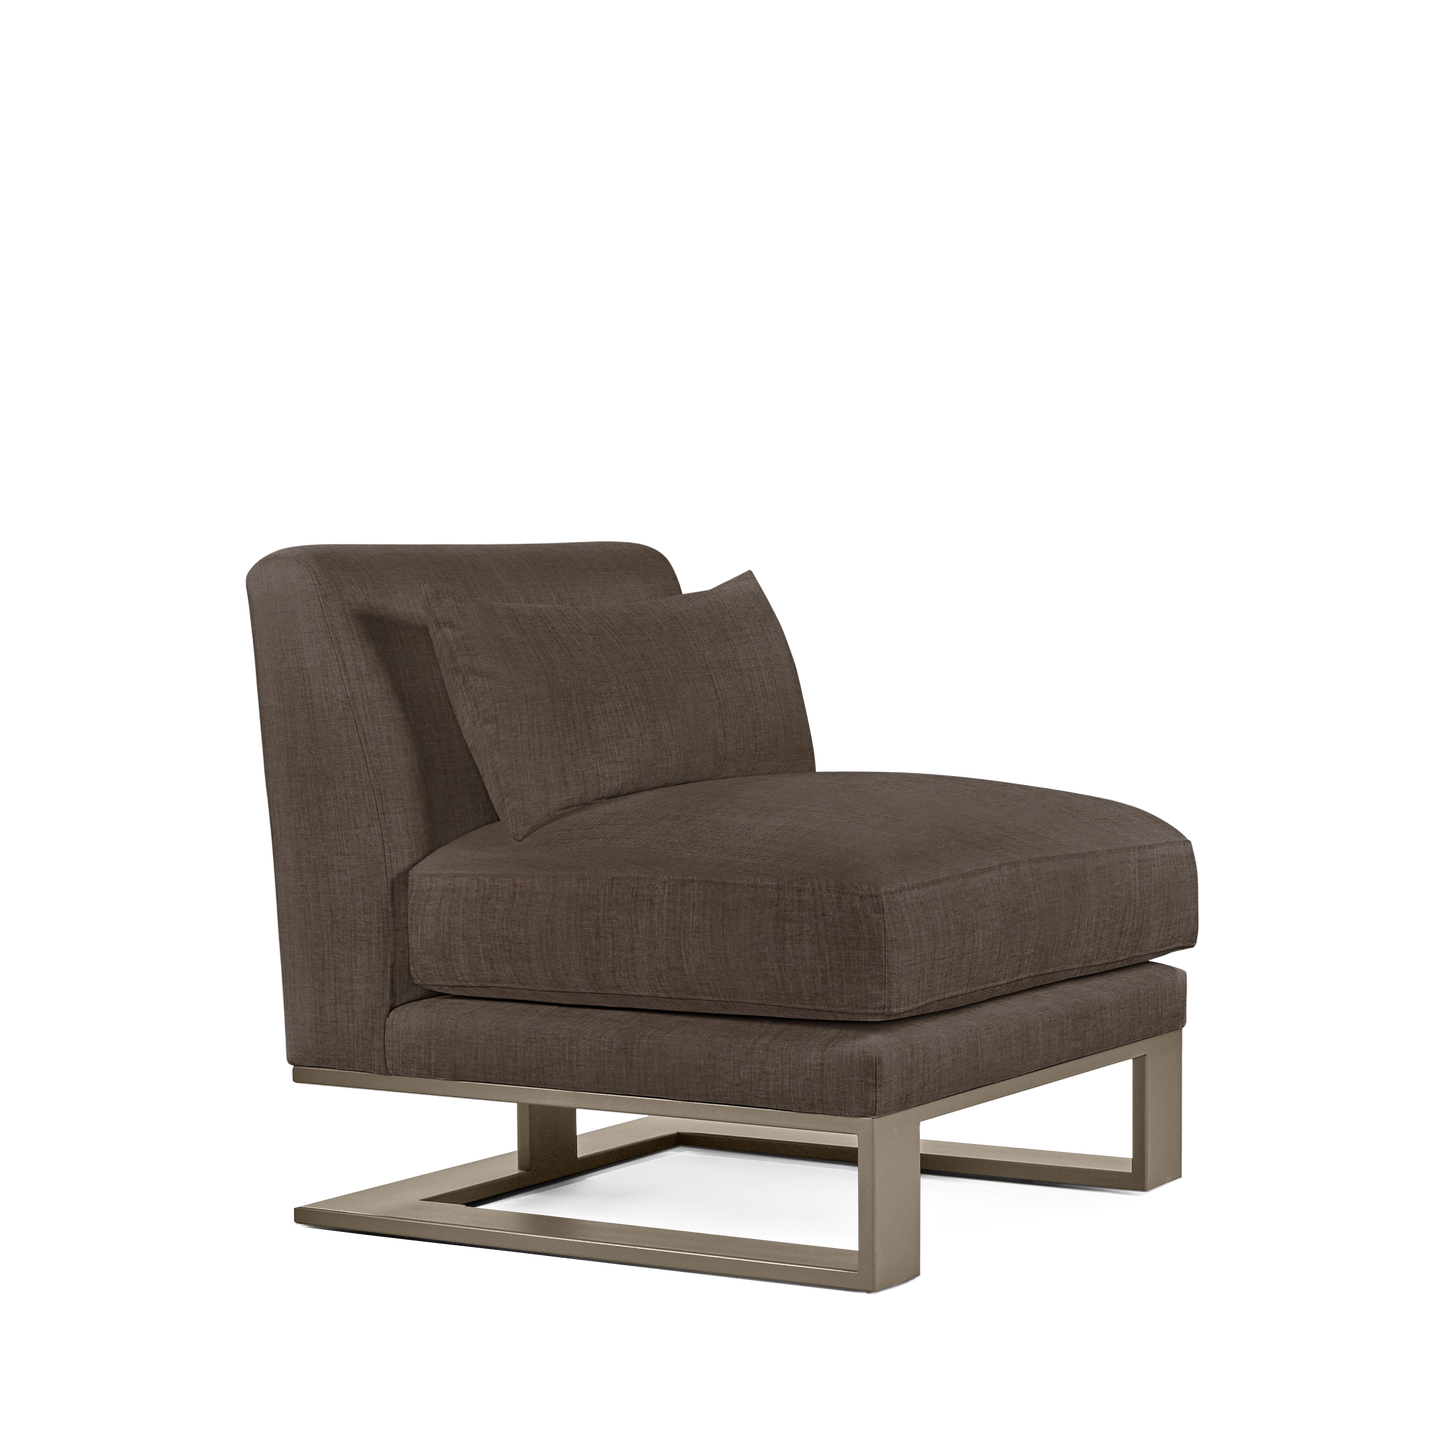 Alpes armchair with dark grey textile and champagne colored wood legs 